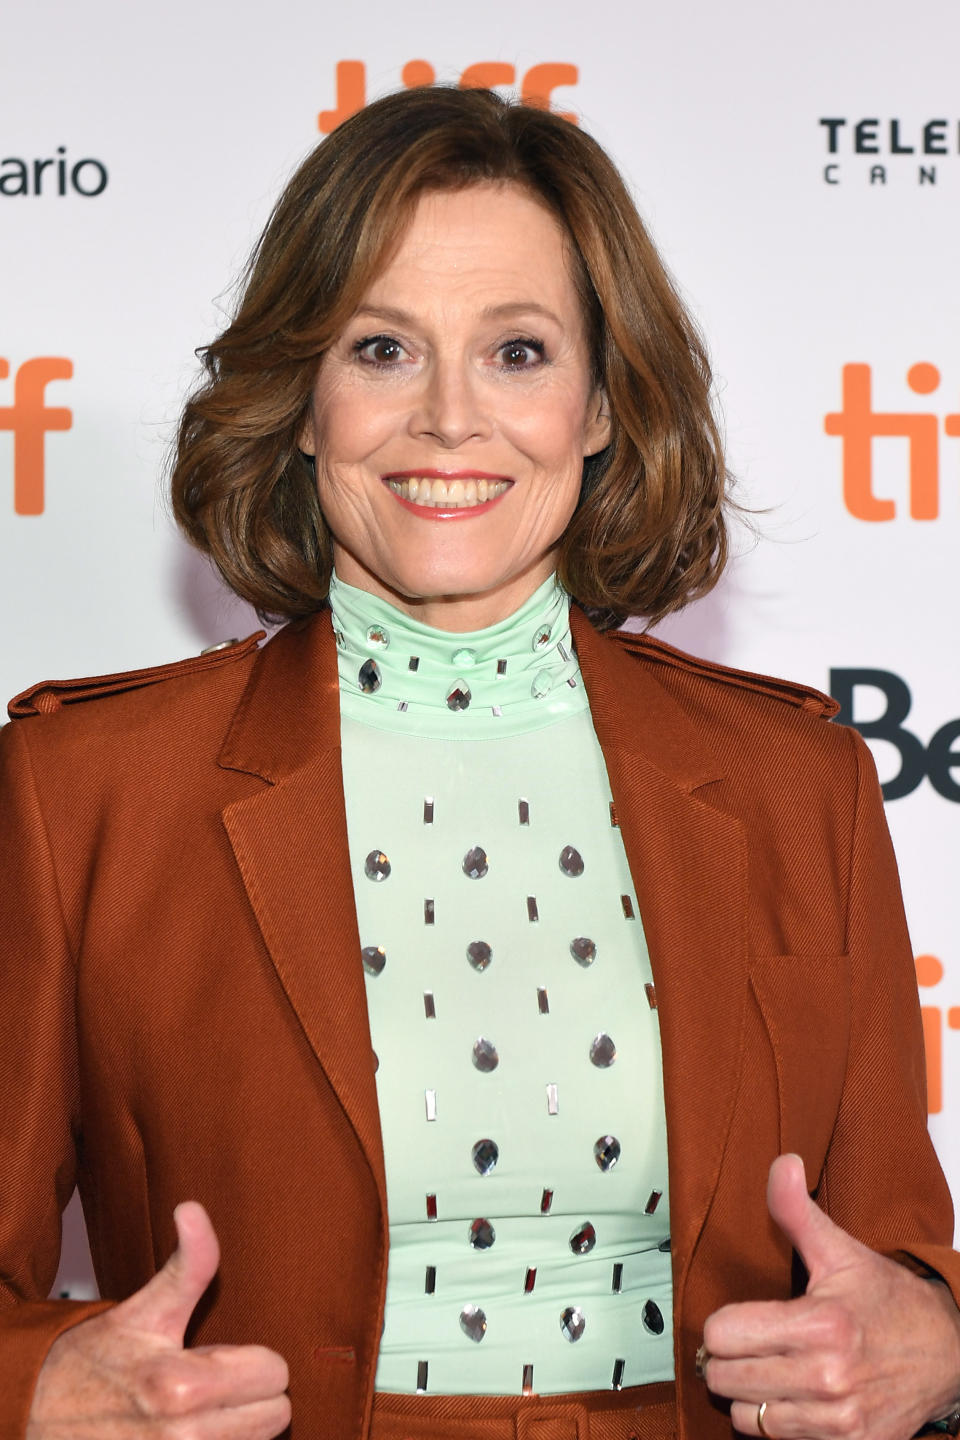 Sigourney Weaver attends "The Good House" Premiere during the 2021 Toronto International Film Festival at Roy Thomson Hall on September 15, 2021